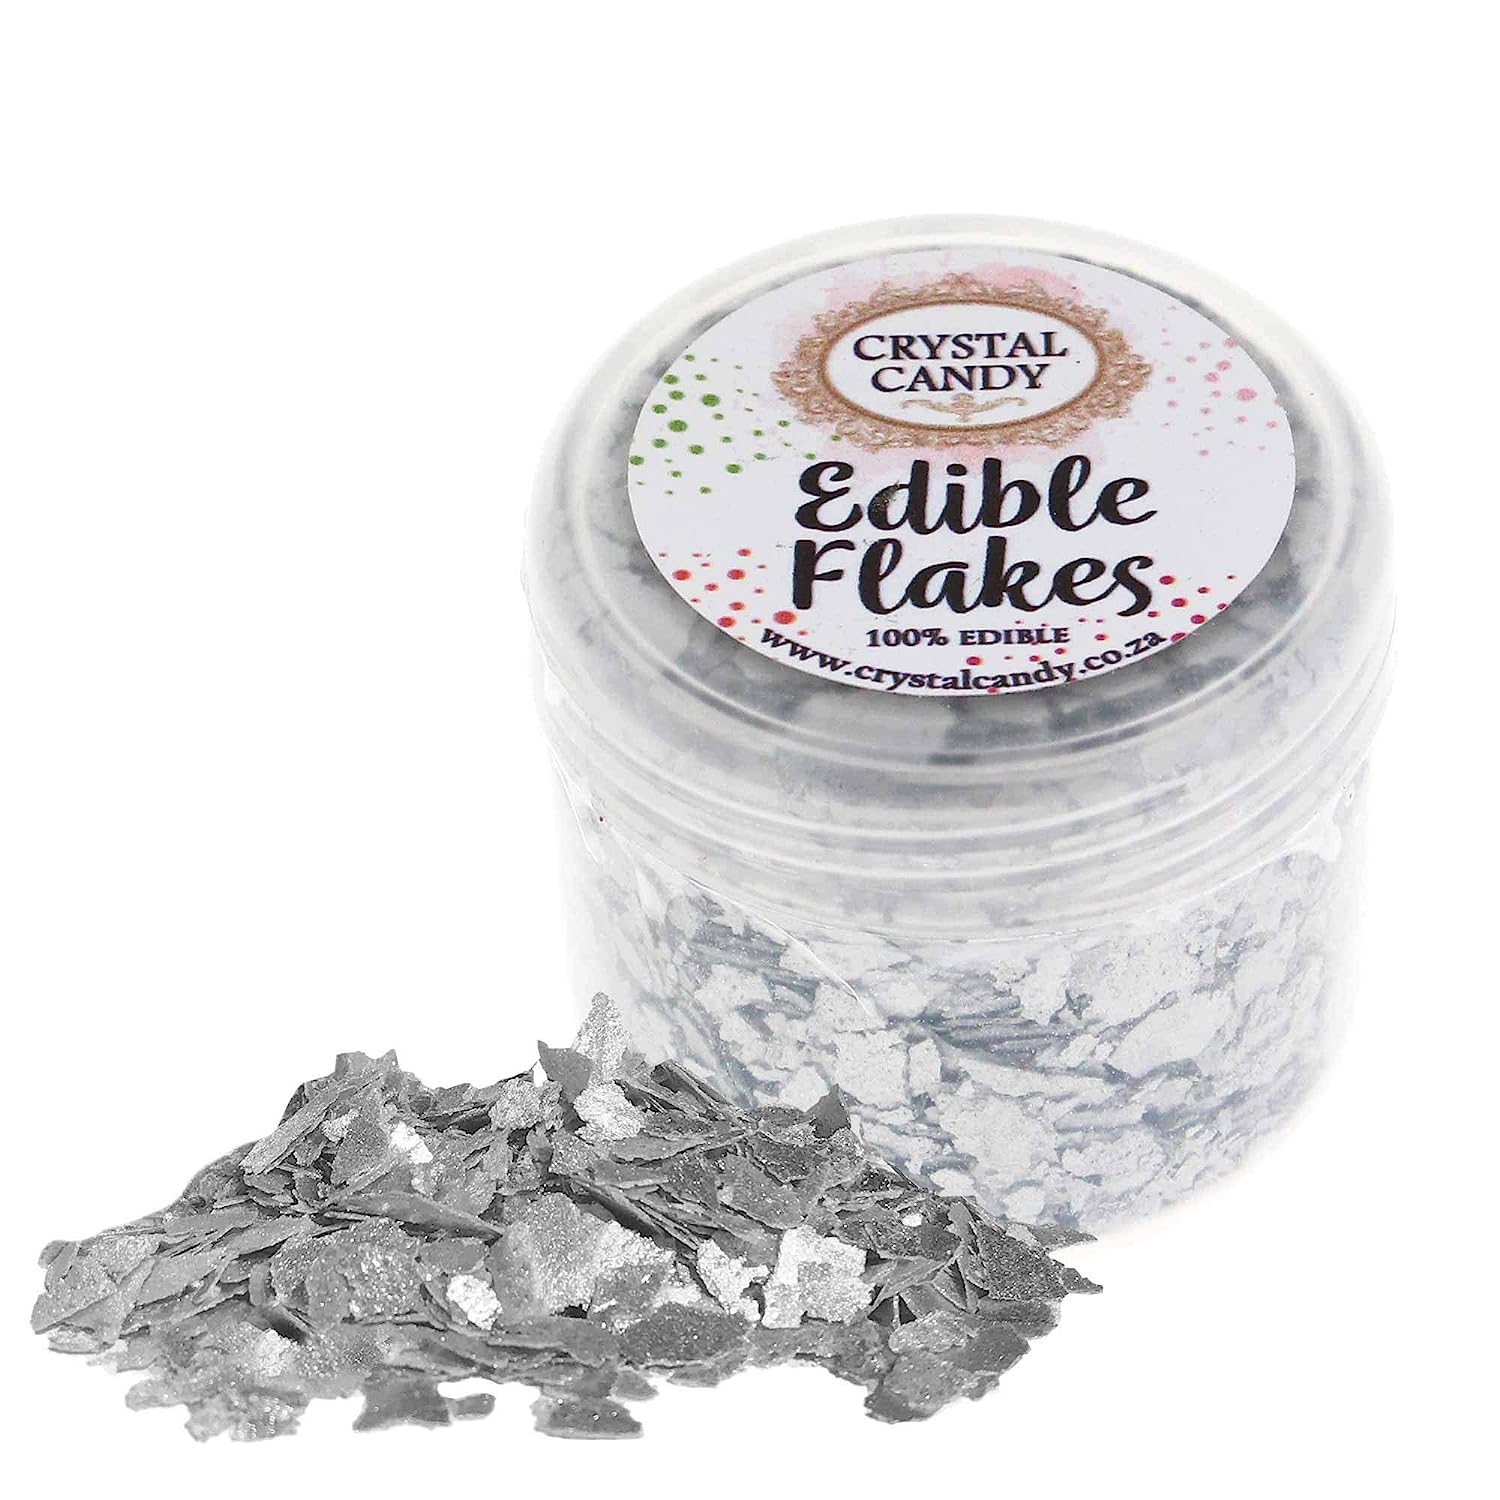 Crystal Candy Edible Flakes, Silver Moon   price checker   price checker Description Gallery Reviews Variations Additional